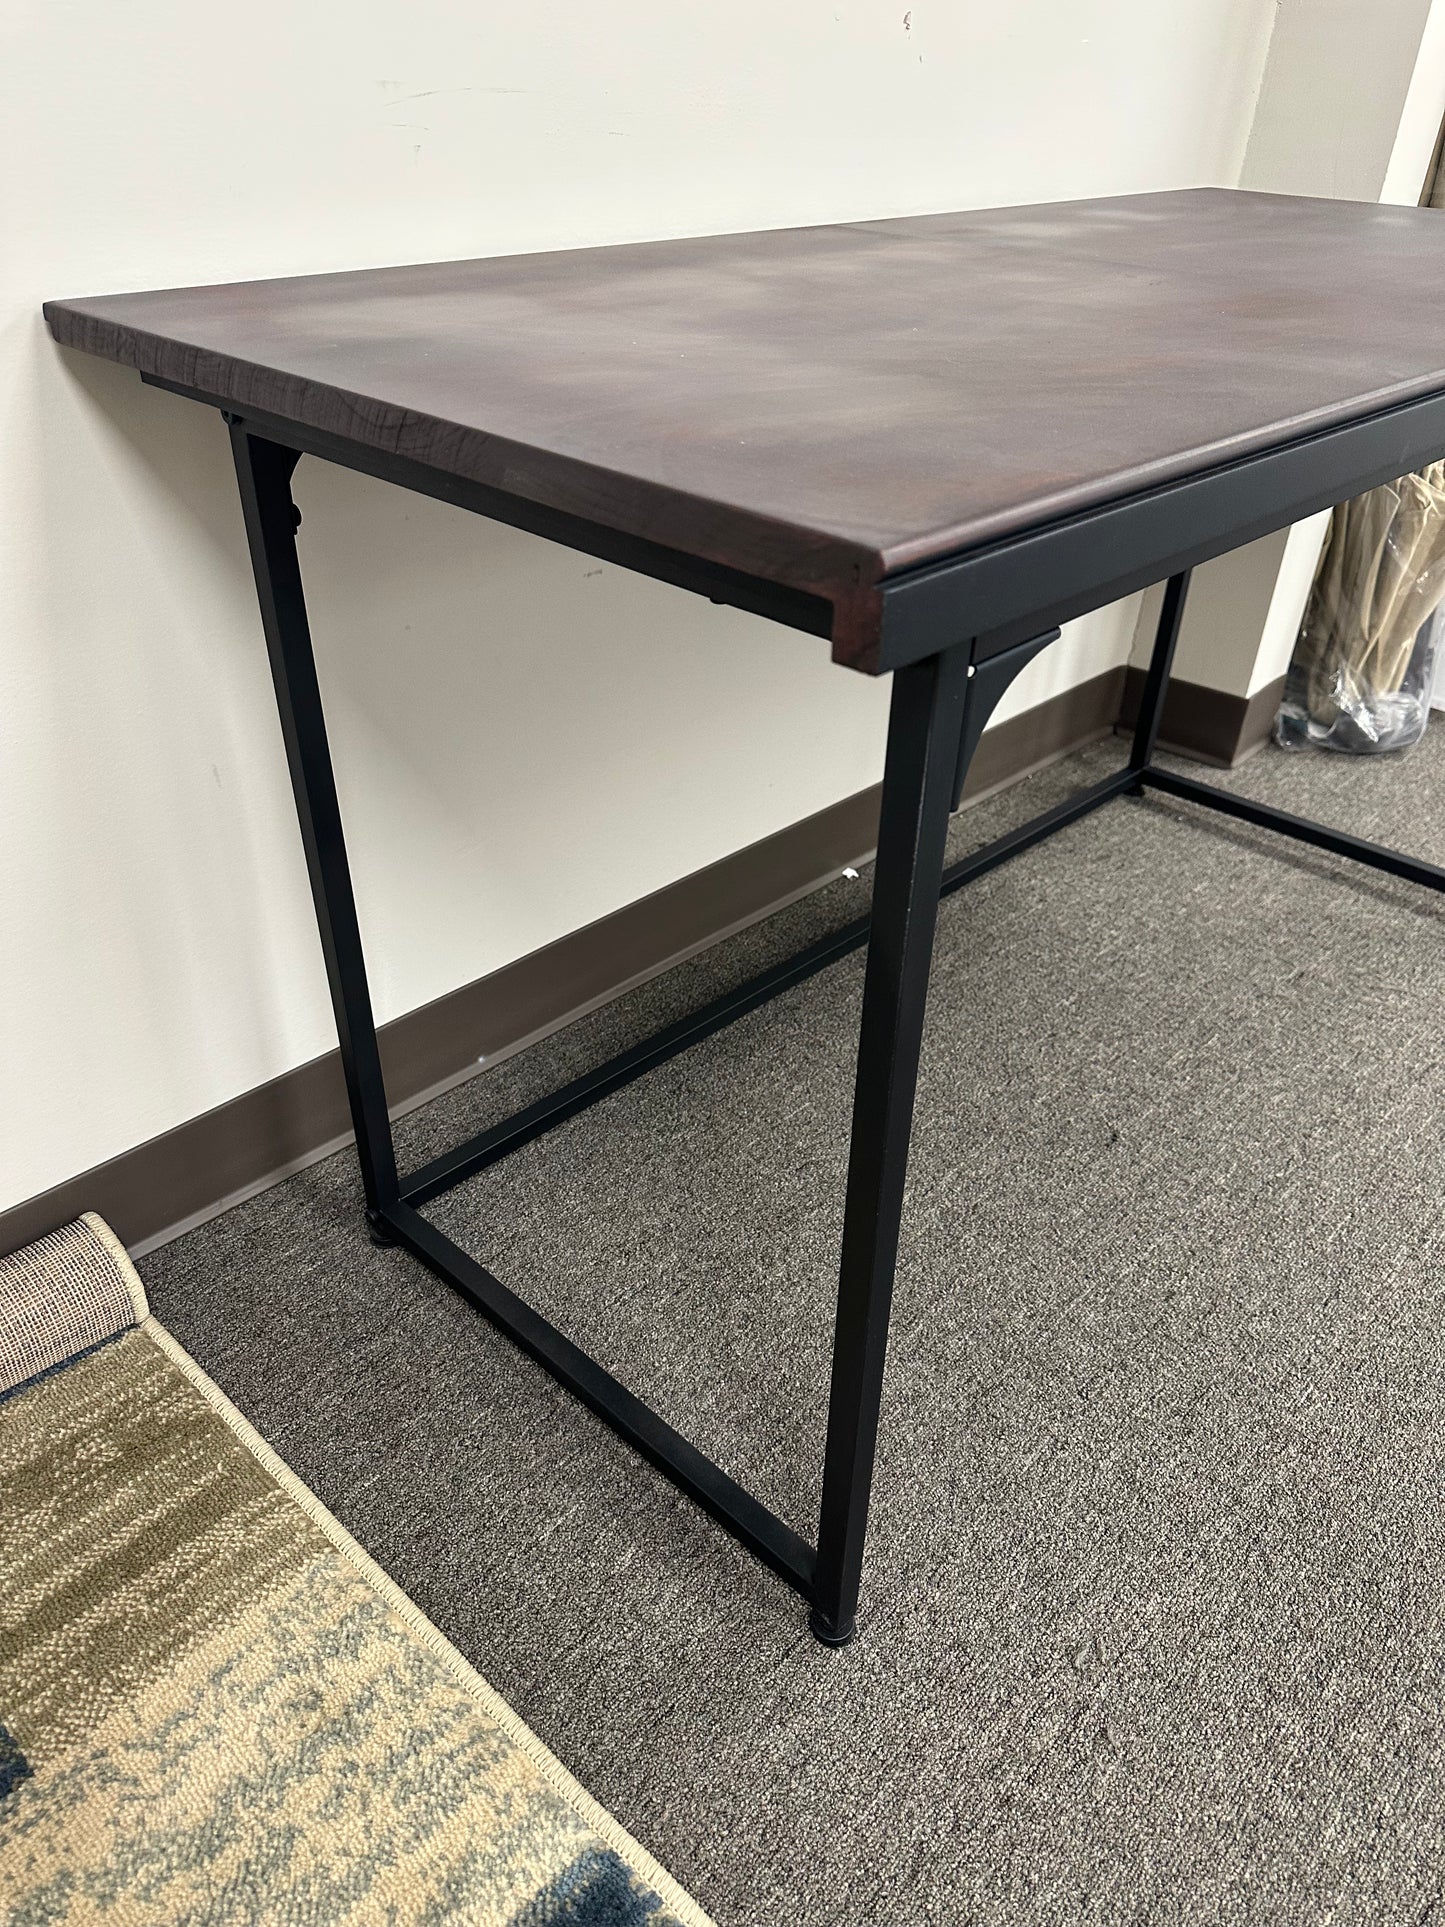 Solid cherry wood desk with metal frame/legs